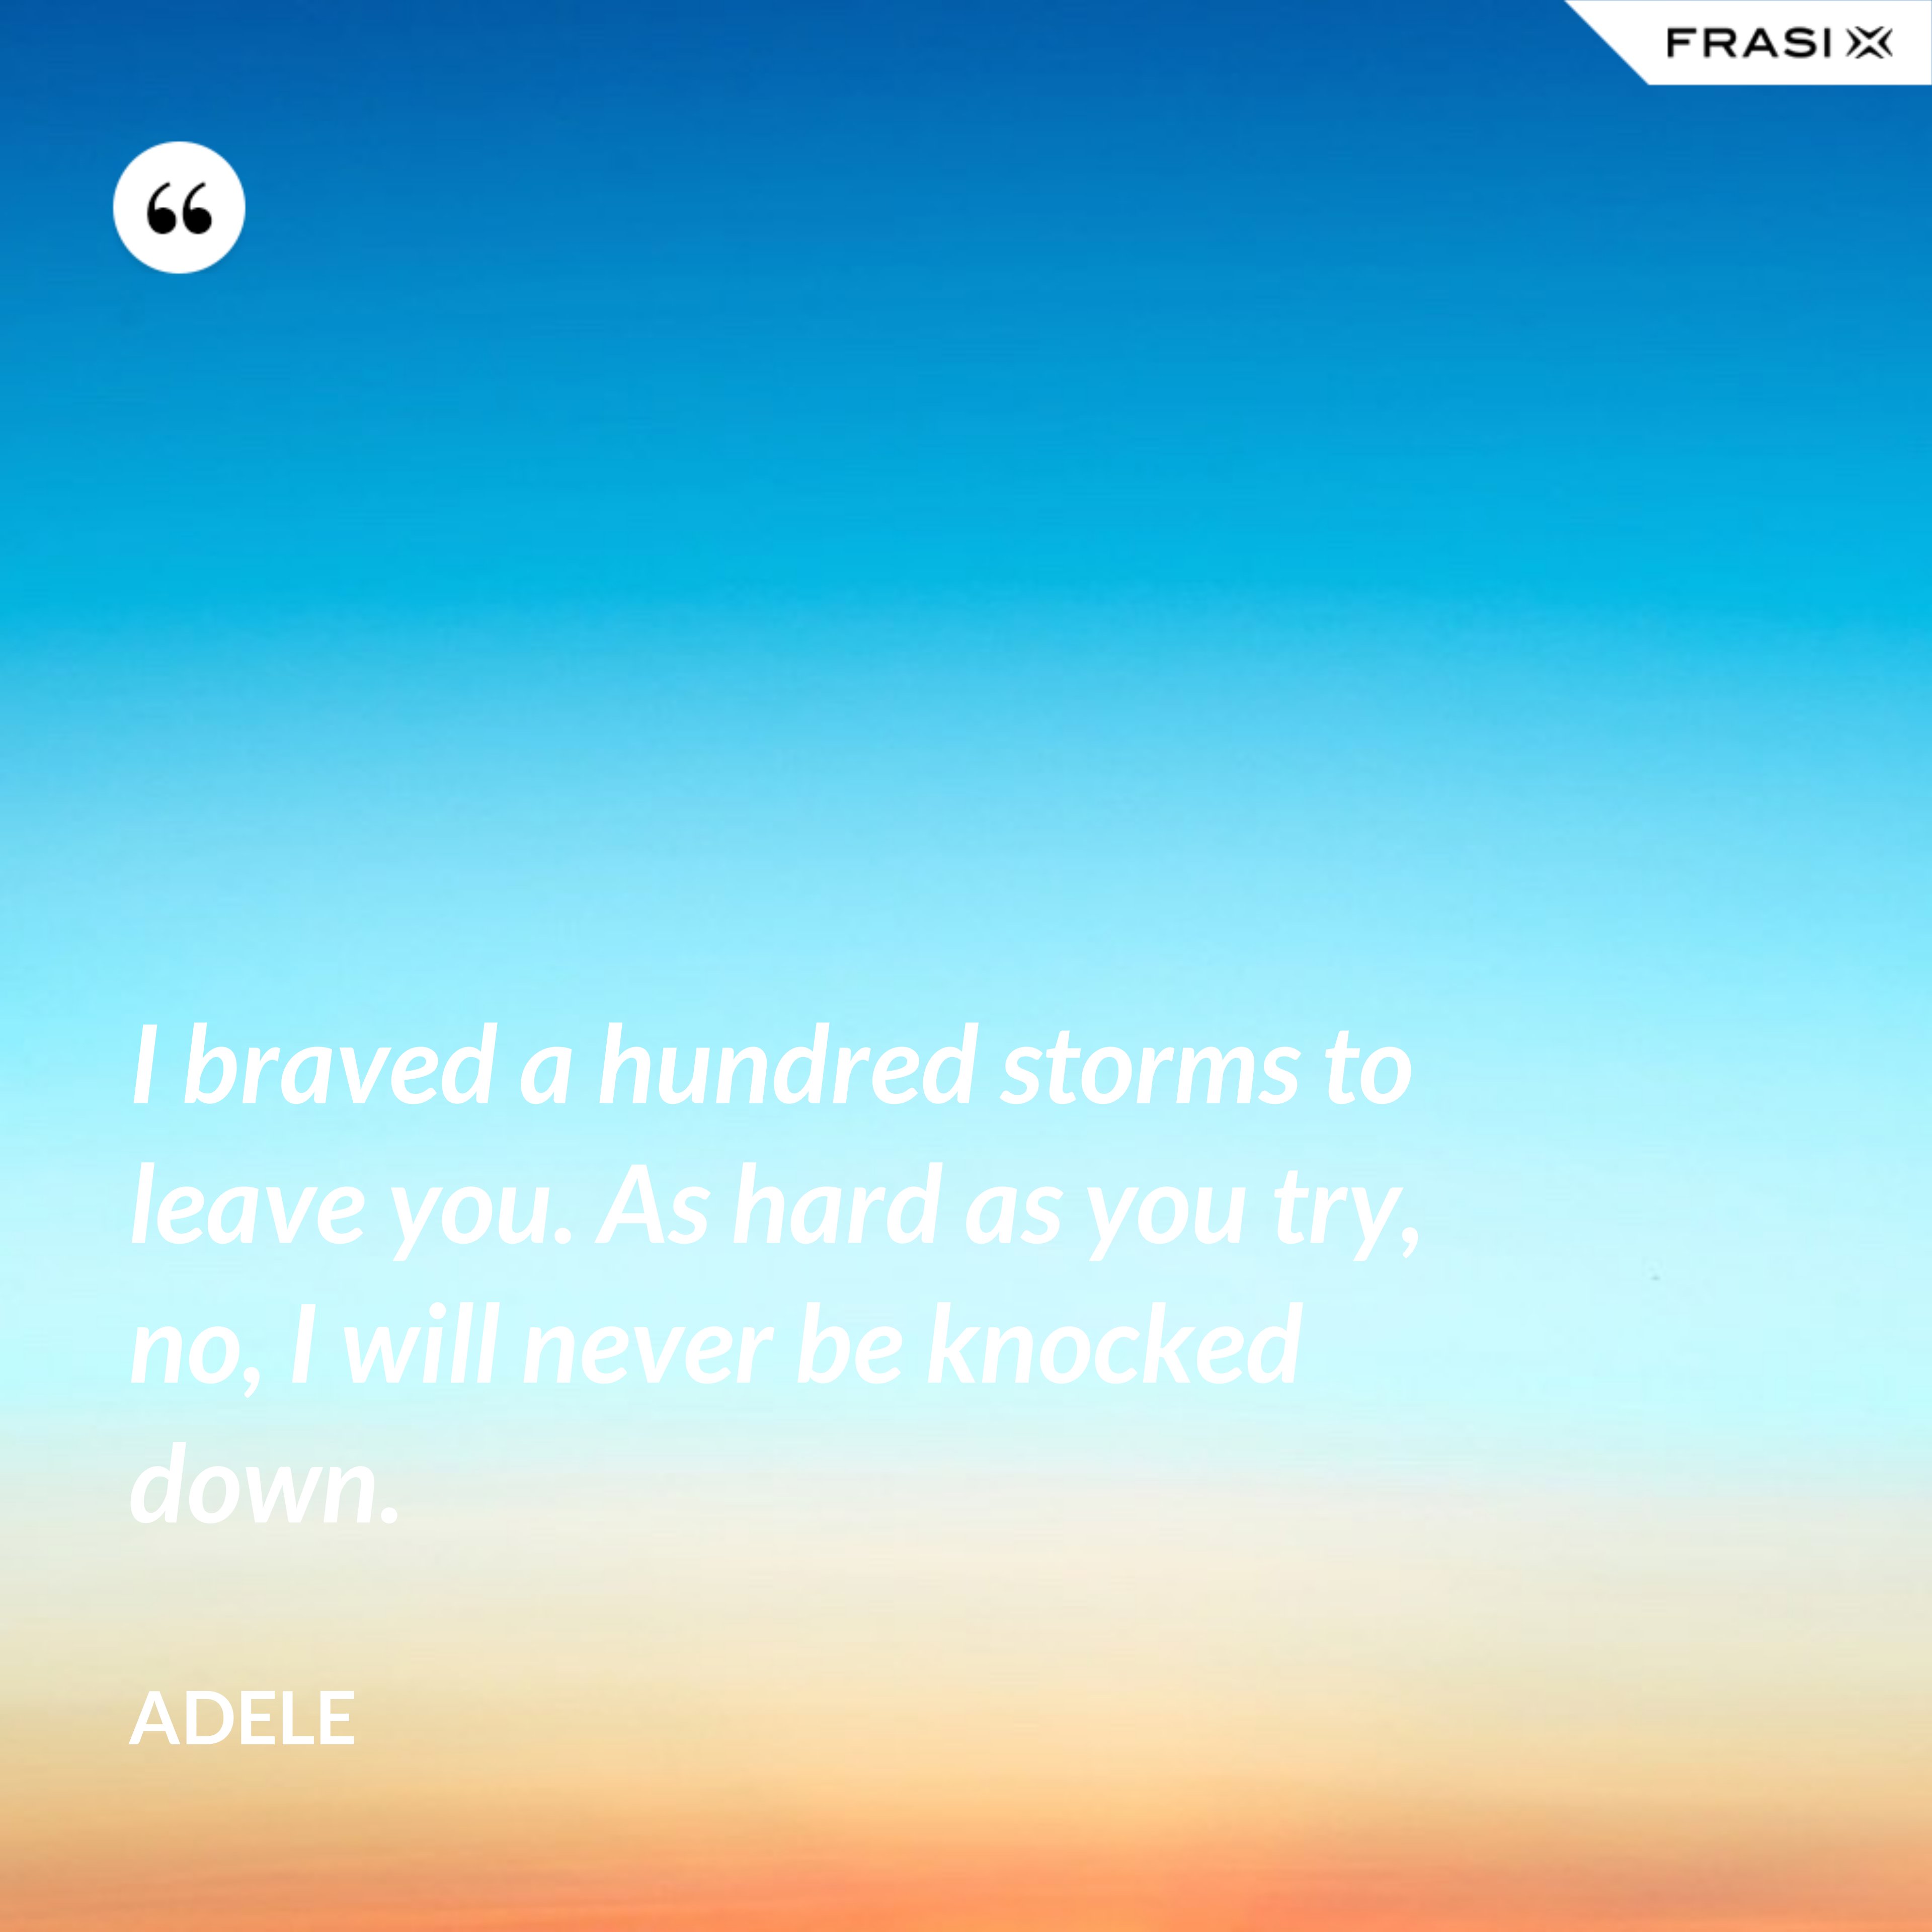 I braved a hundred storms to leave you. As hard as you try, no, I will never be knocked down. - Adele